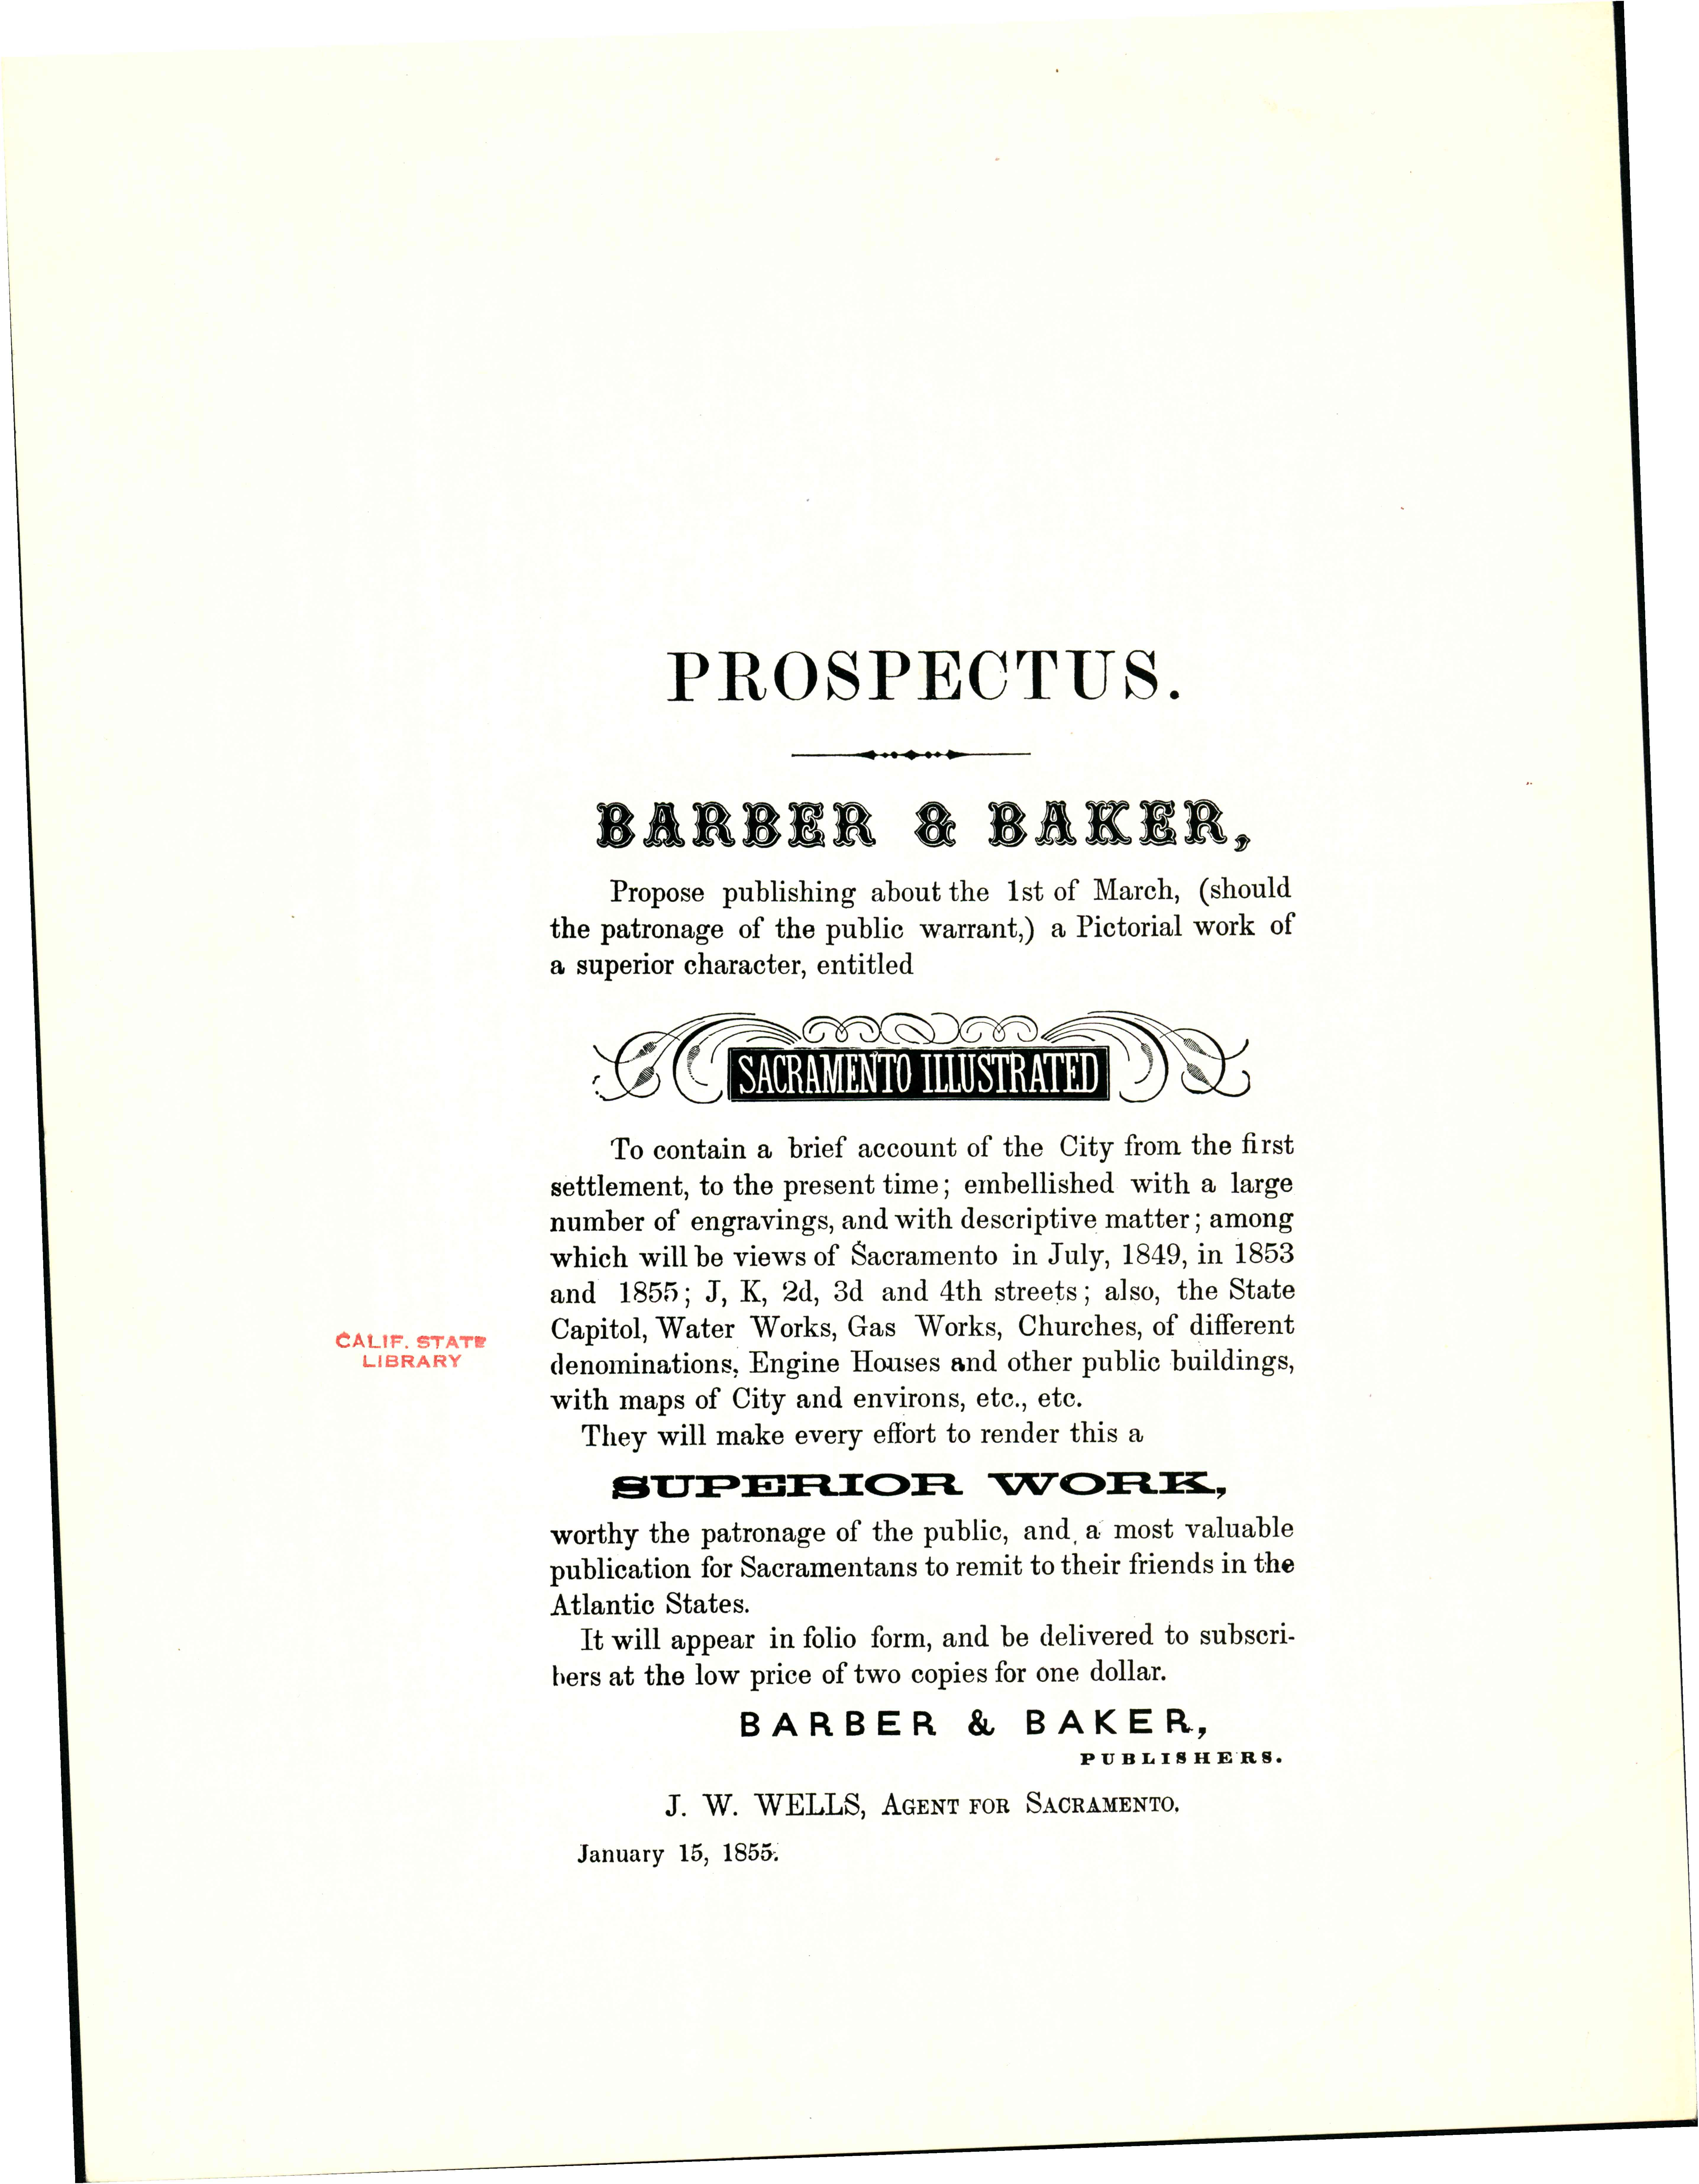 Prospectus Barber & Baker in bold letter on top of page